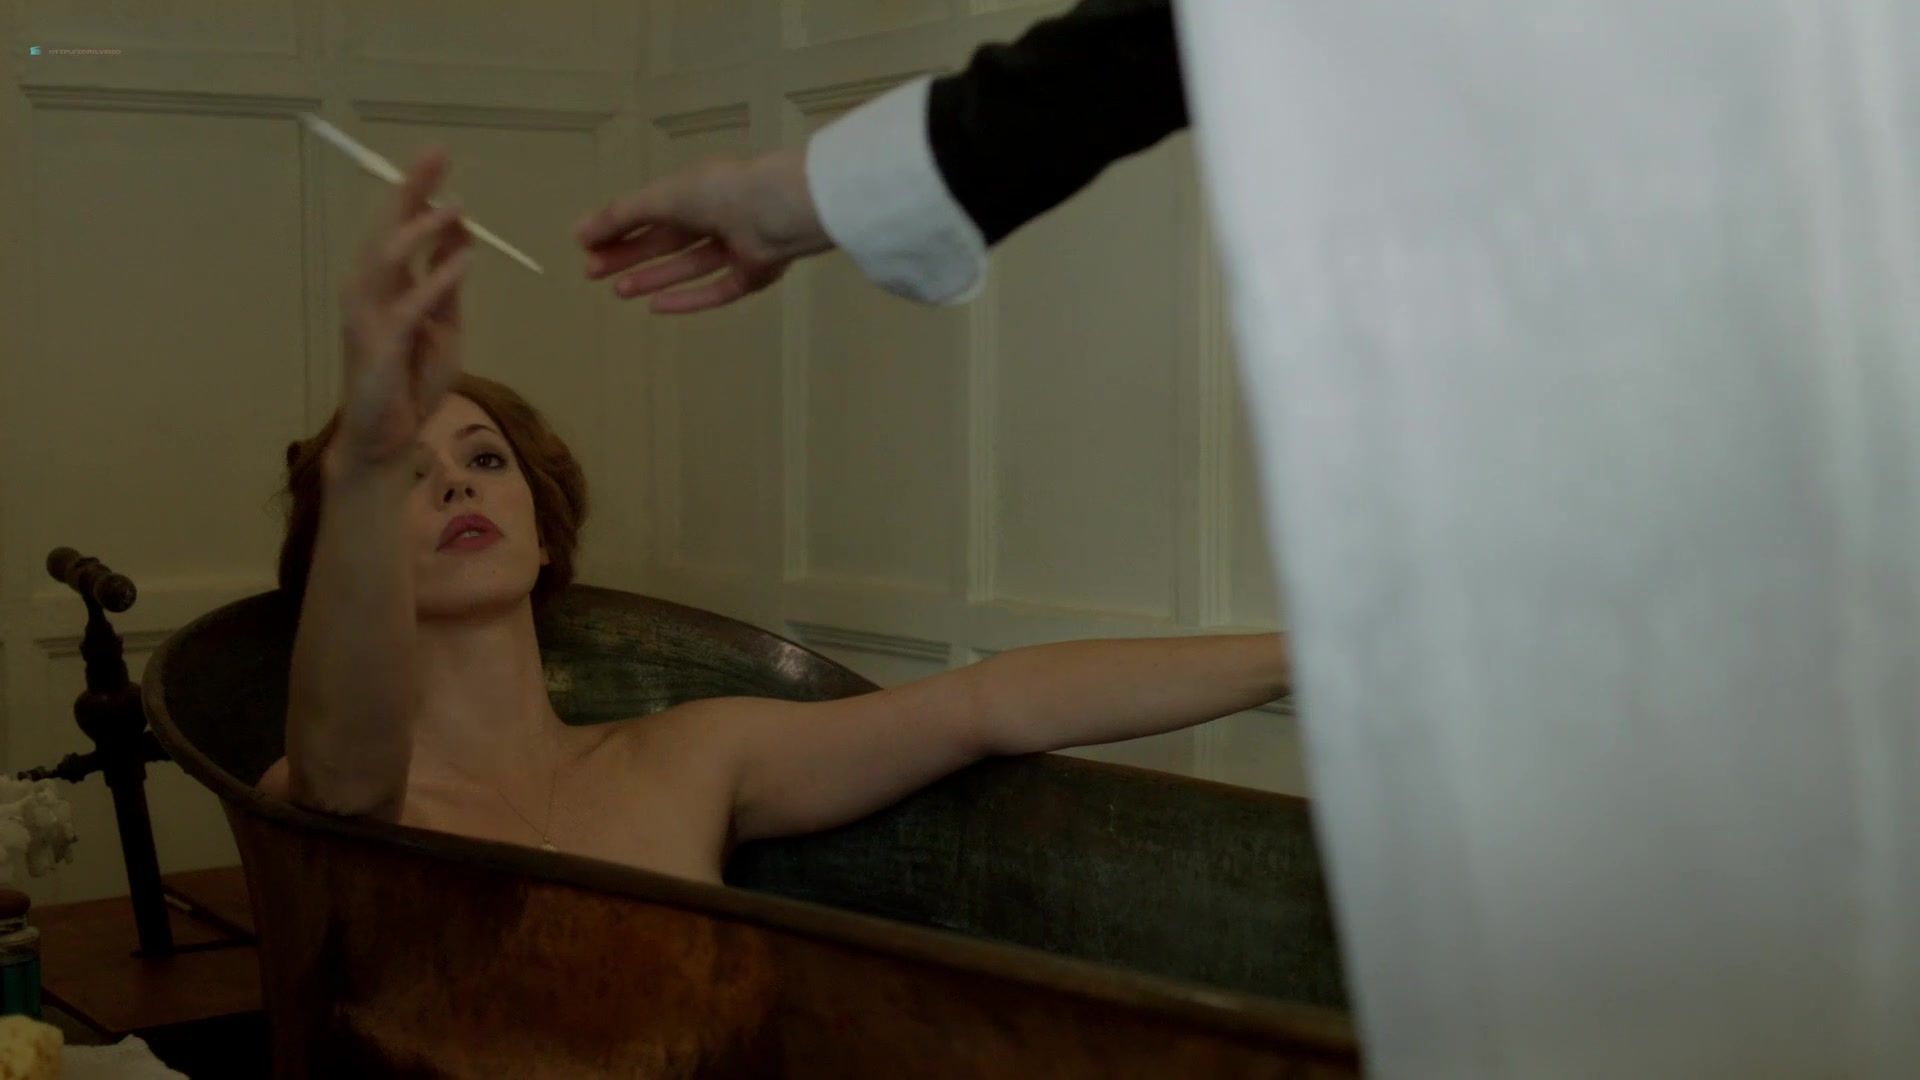 OnOff Rebecca Hall, Adelaide Clemens naked - Parades End (2012) Closeup - 1